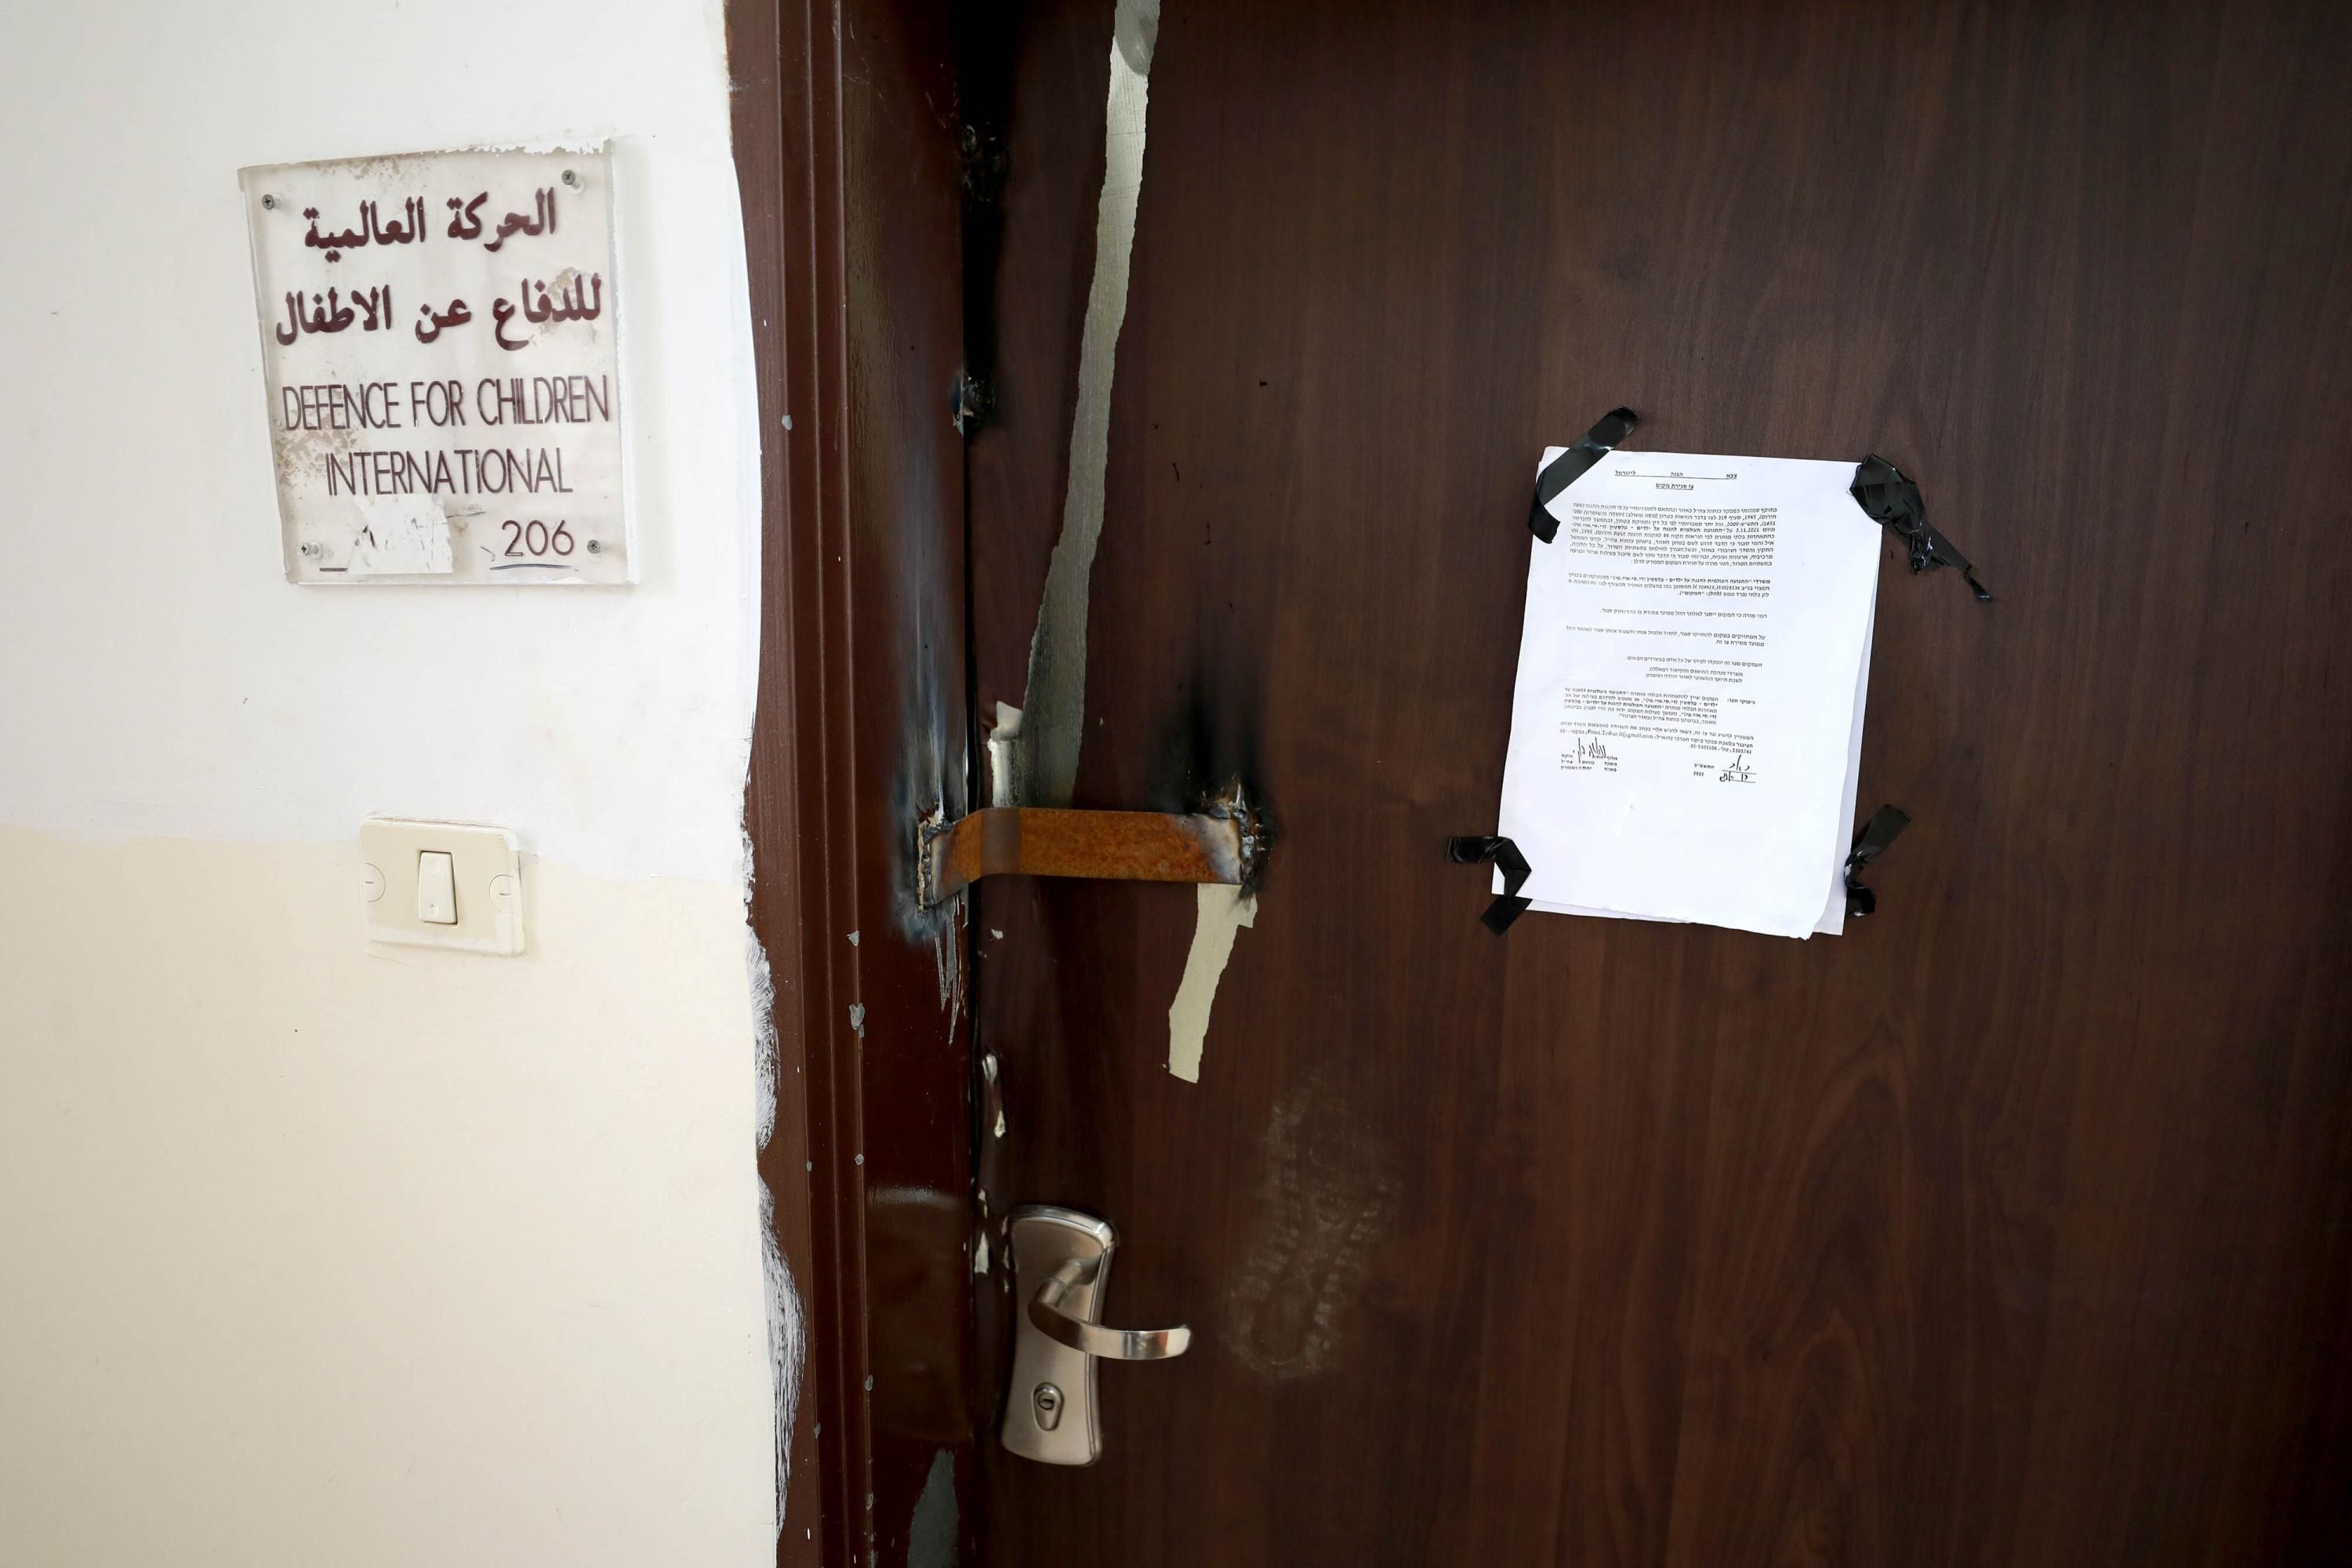 Israeli forces raided the office of a Palestinian rights group